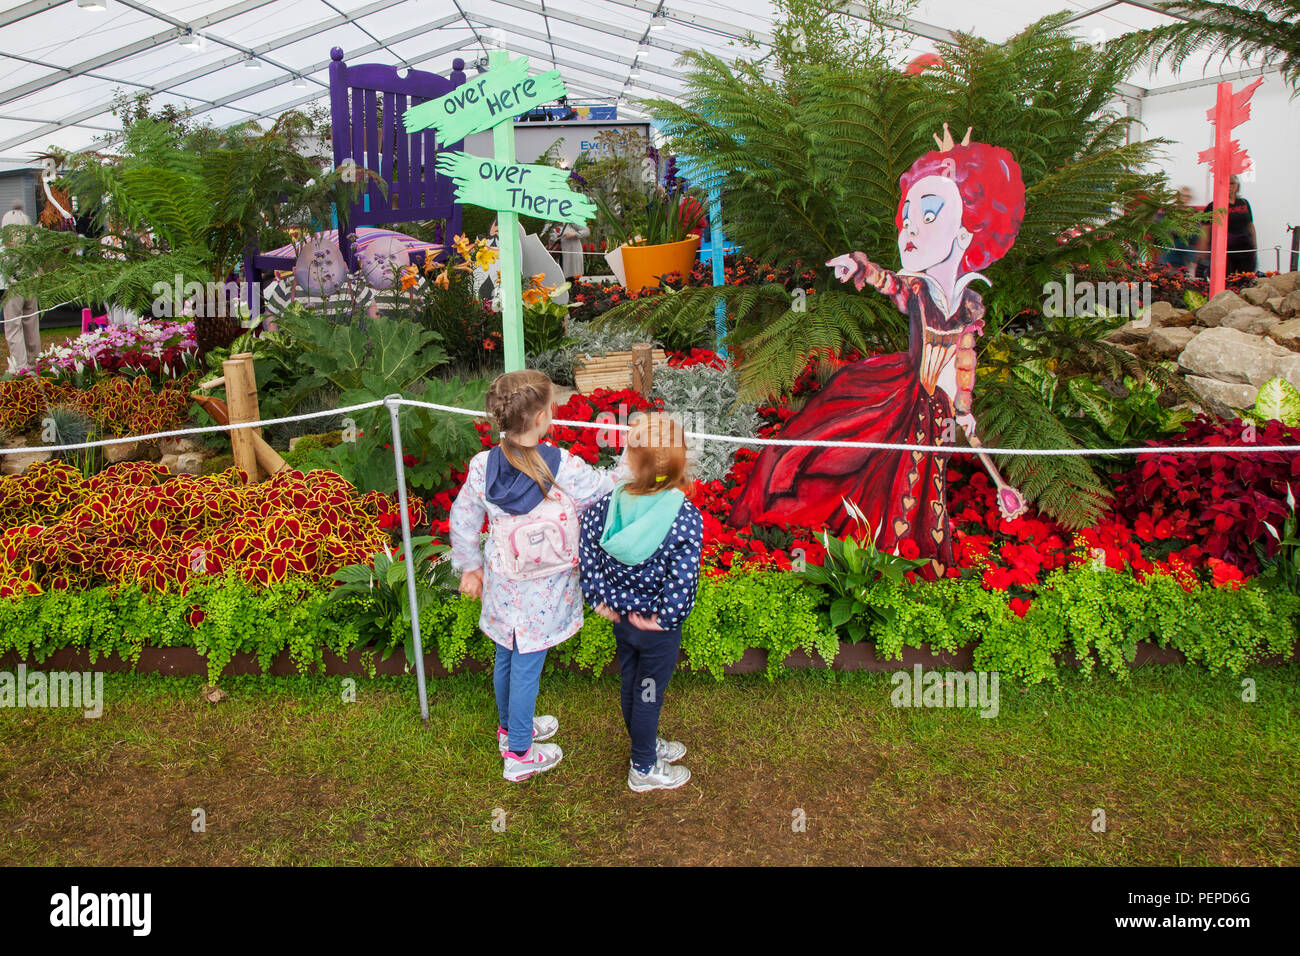 Children at Southport, Merseyside, UK. 17th Aug, 2018. The Queen of hearts points to visitors at Southport Flower Show as entertainers, exhibitors, garden designers, and floral artists wow the visitors to this famous annual event. Credit; MediaWorldImages/AlamyLiveNews Stock Photo